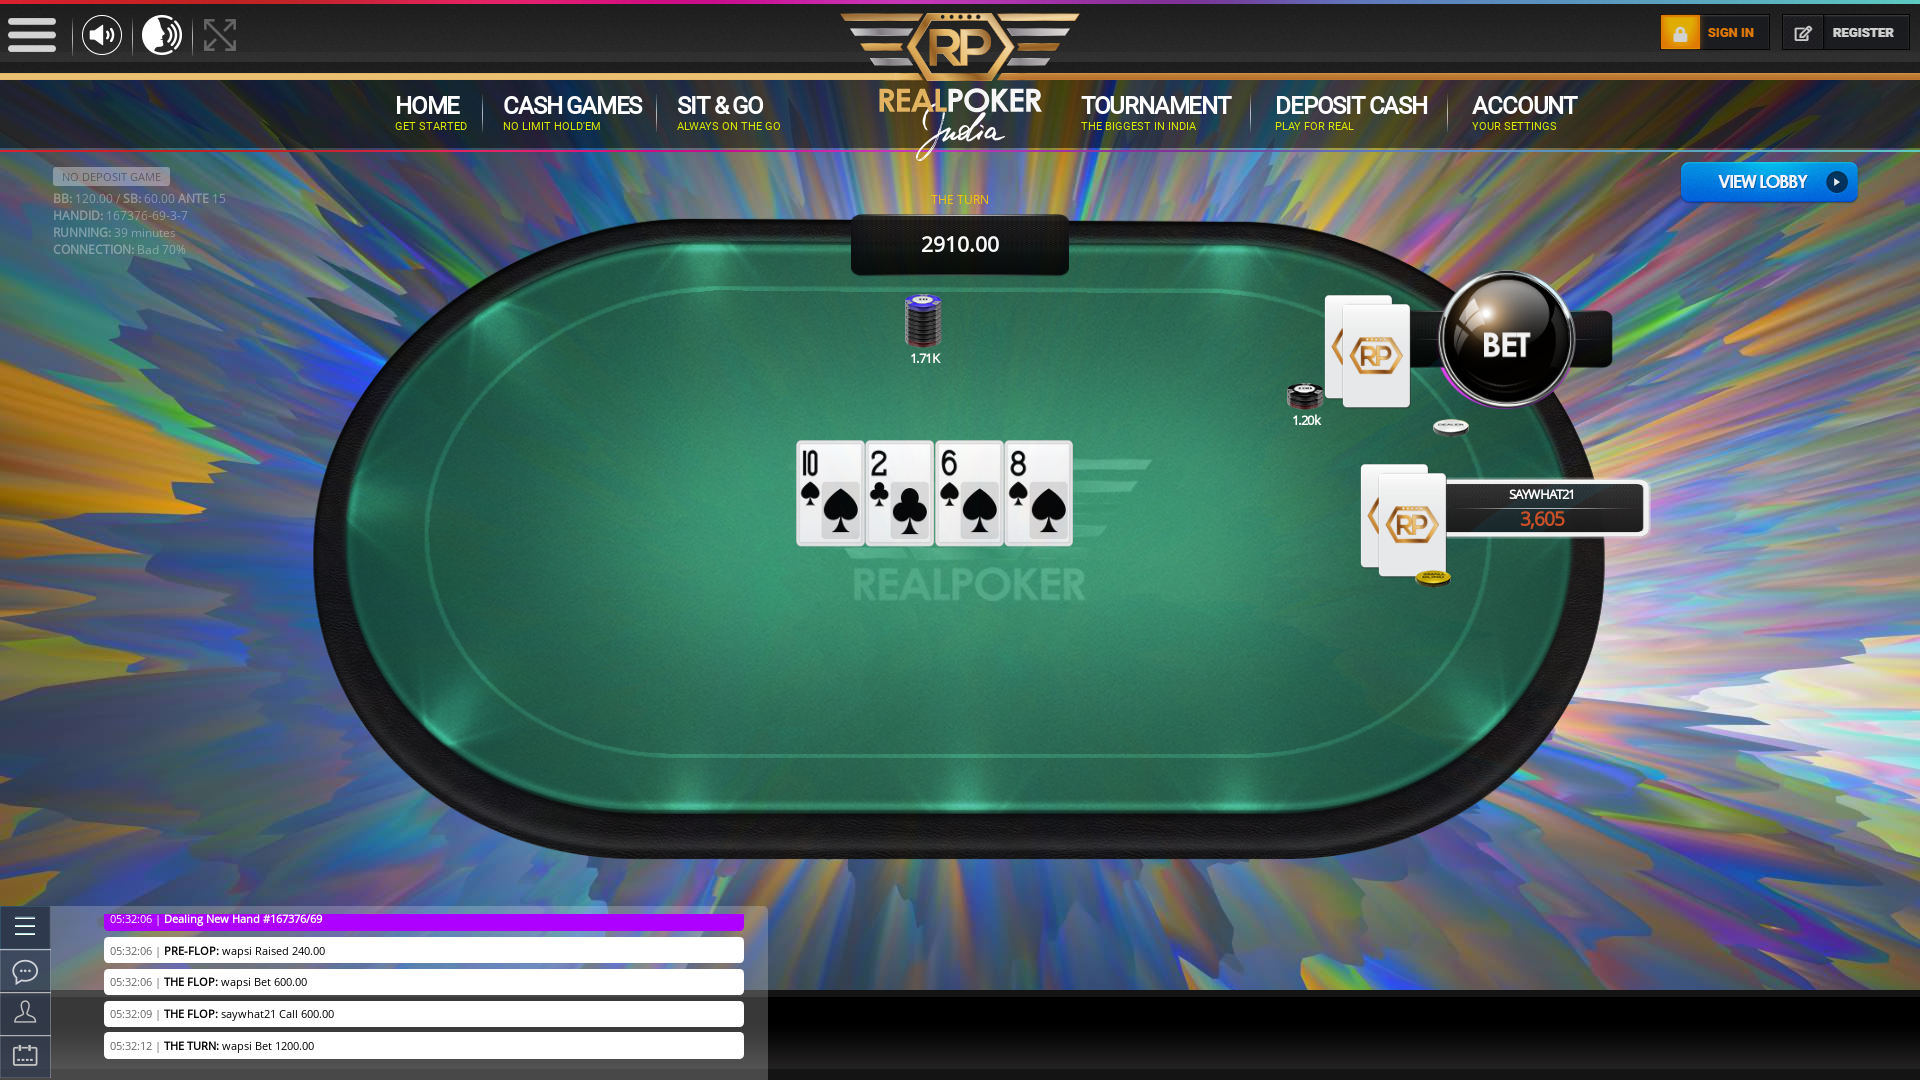 saywhat21 playing online poker on the Panaji table